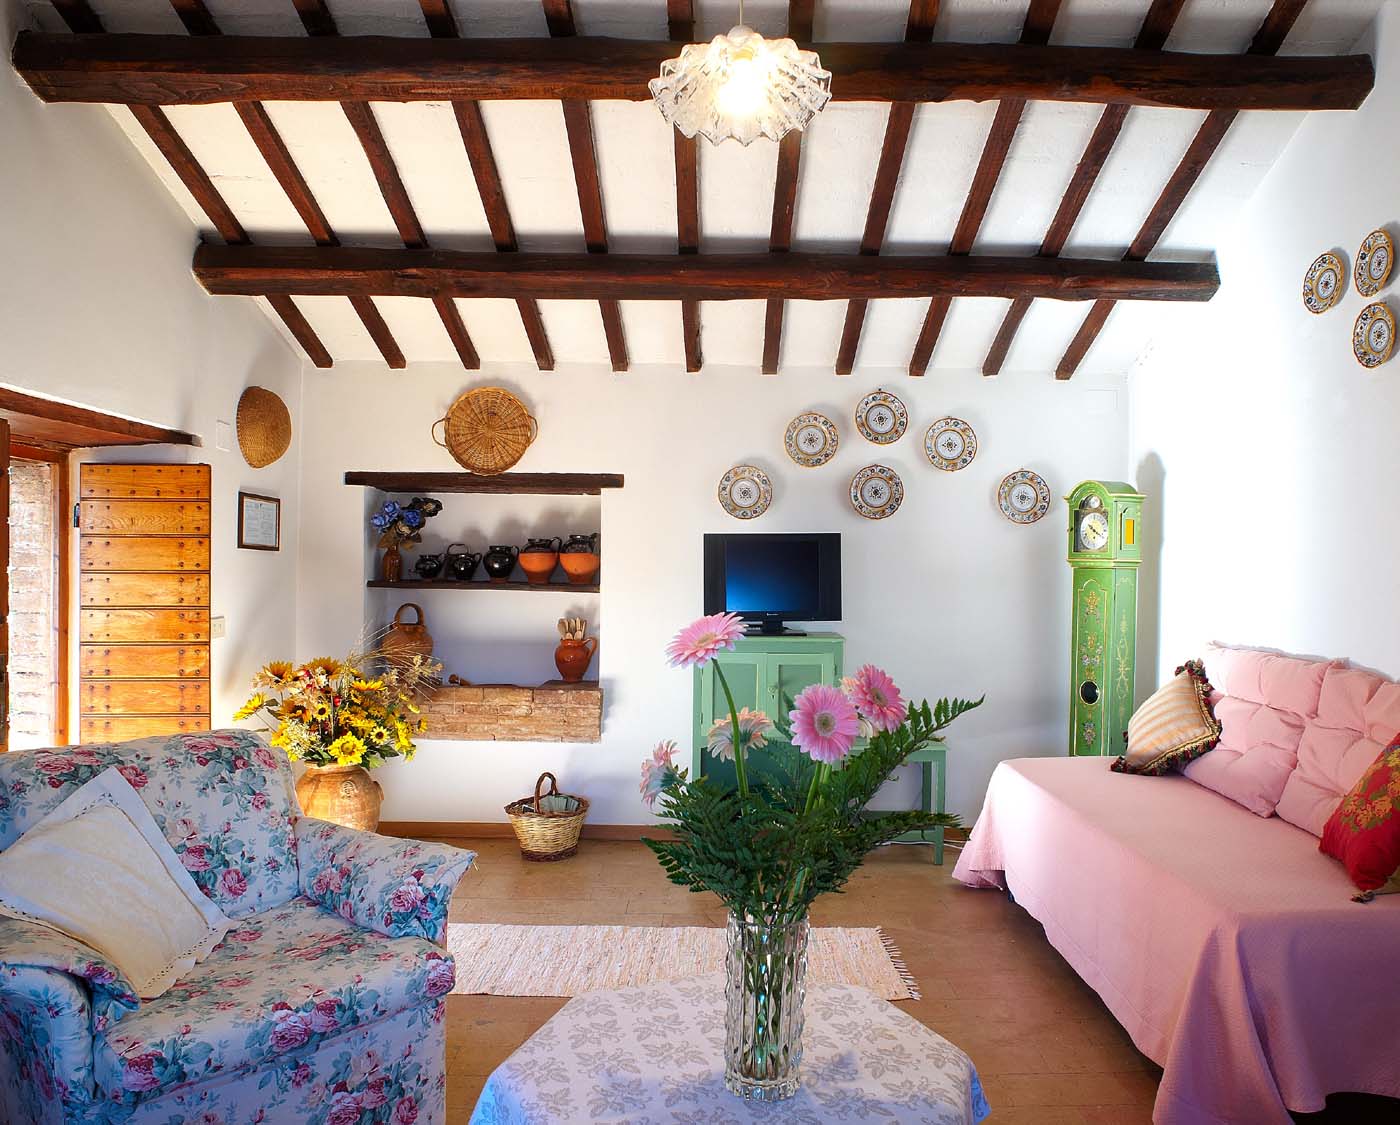 Holiday cottage for rent in Umbria